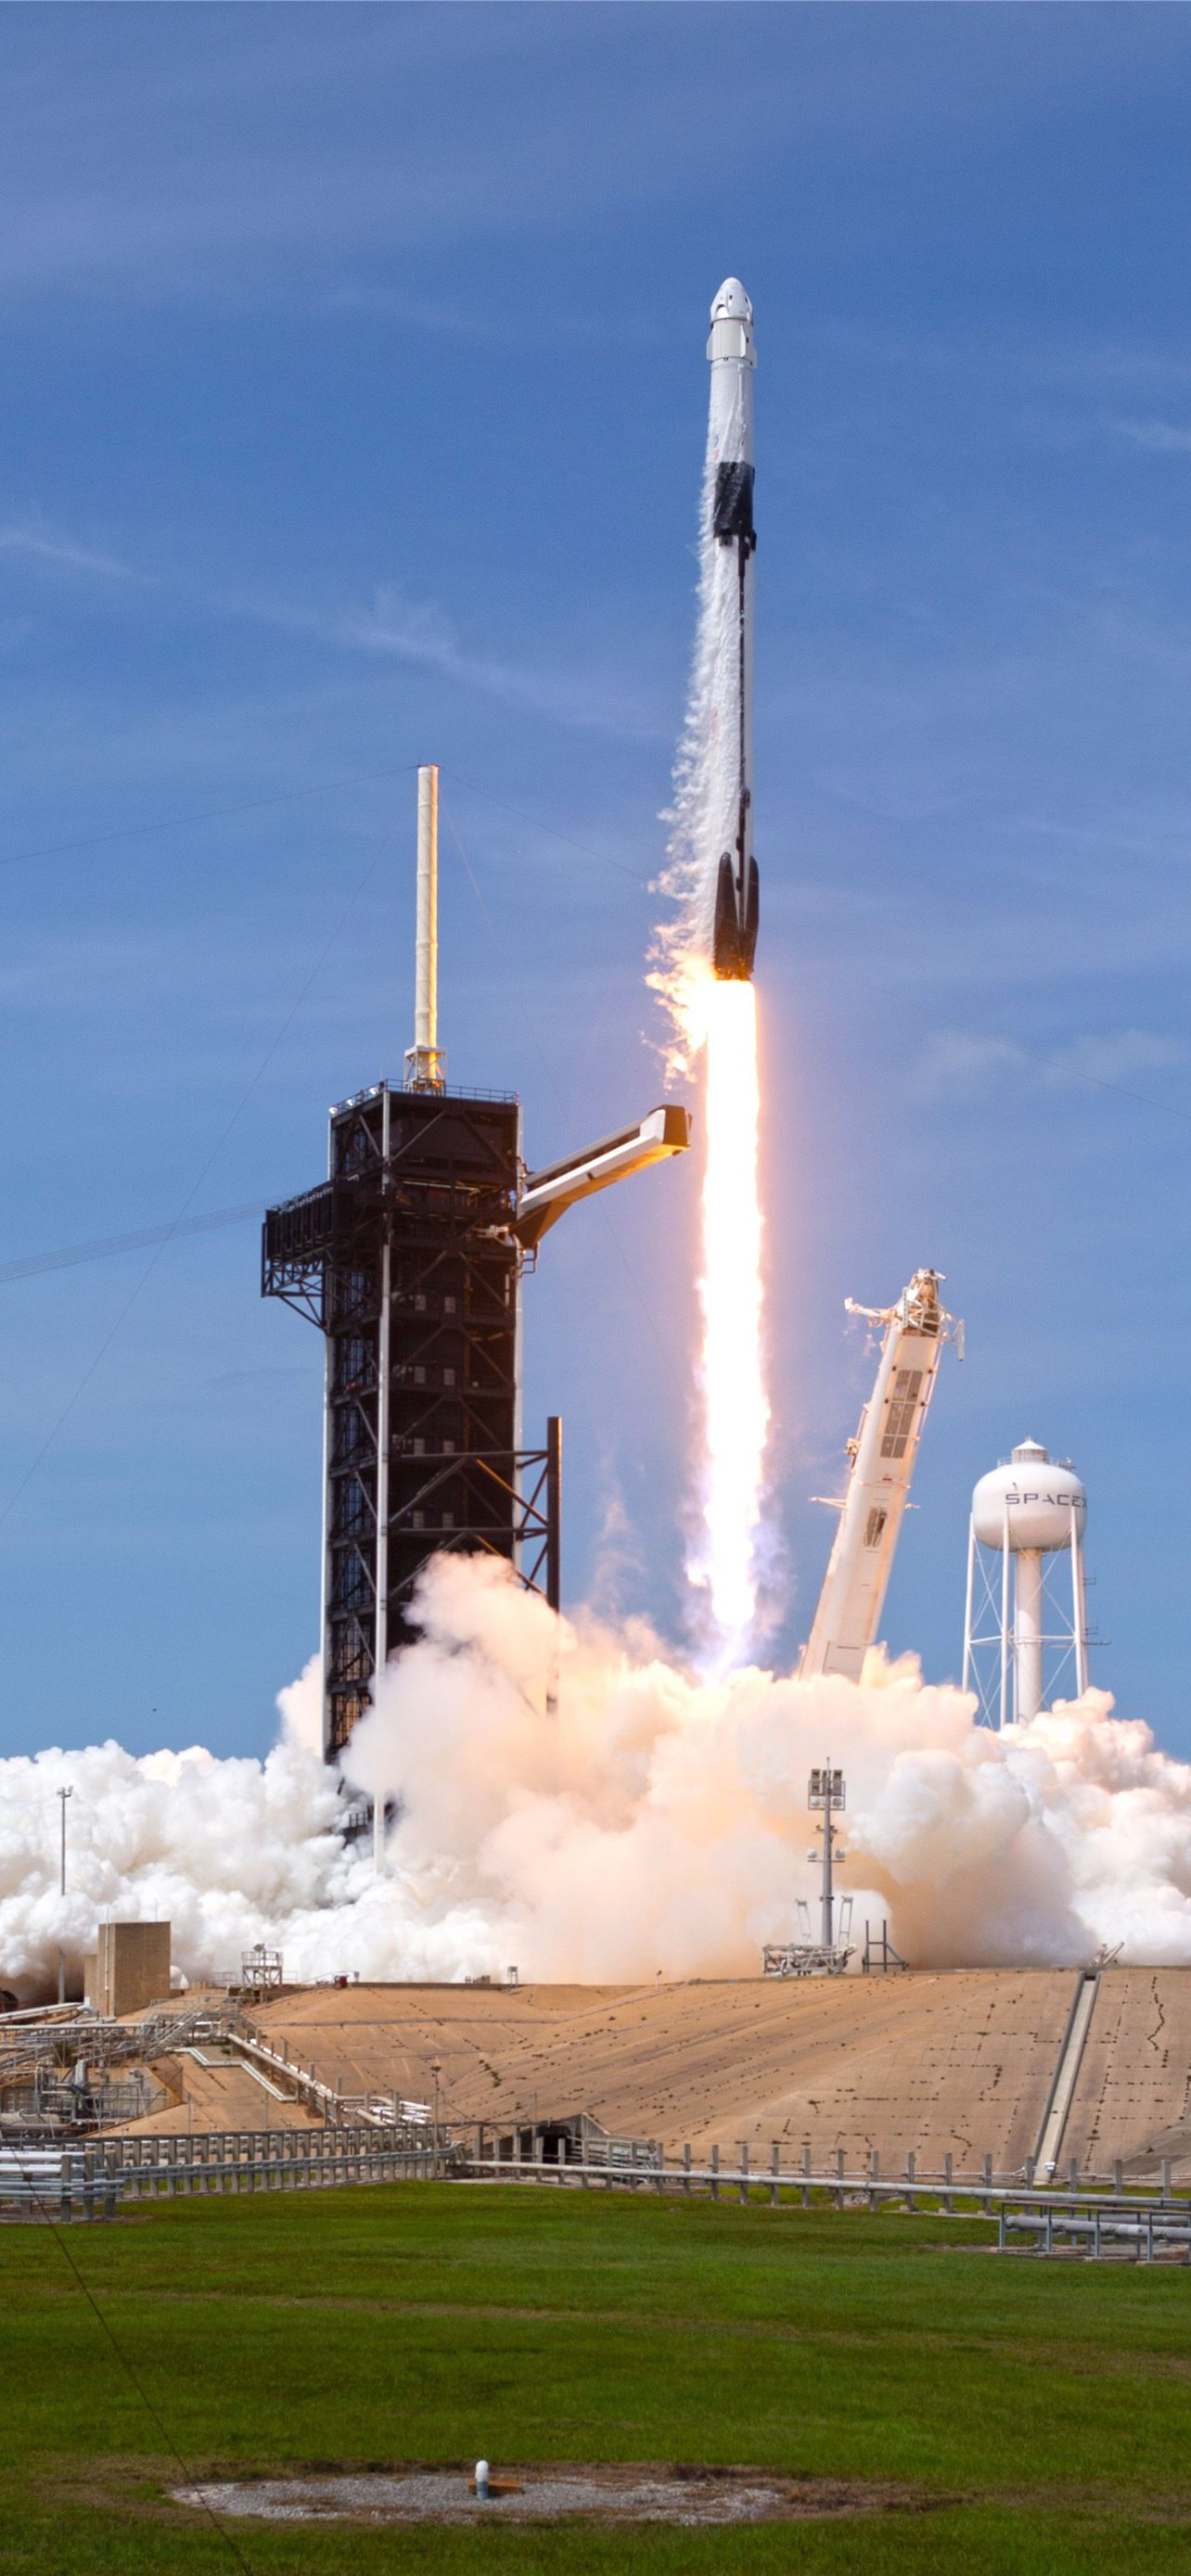 1284x2778 Falcon 9 rocket on the Demo 2 mission Spacex phone iPhone Wallpapers Free Download